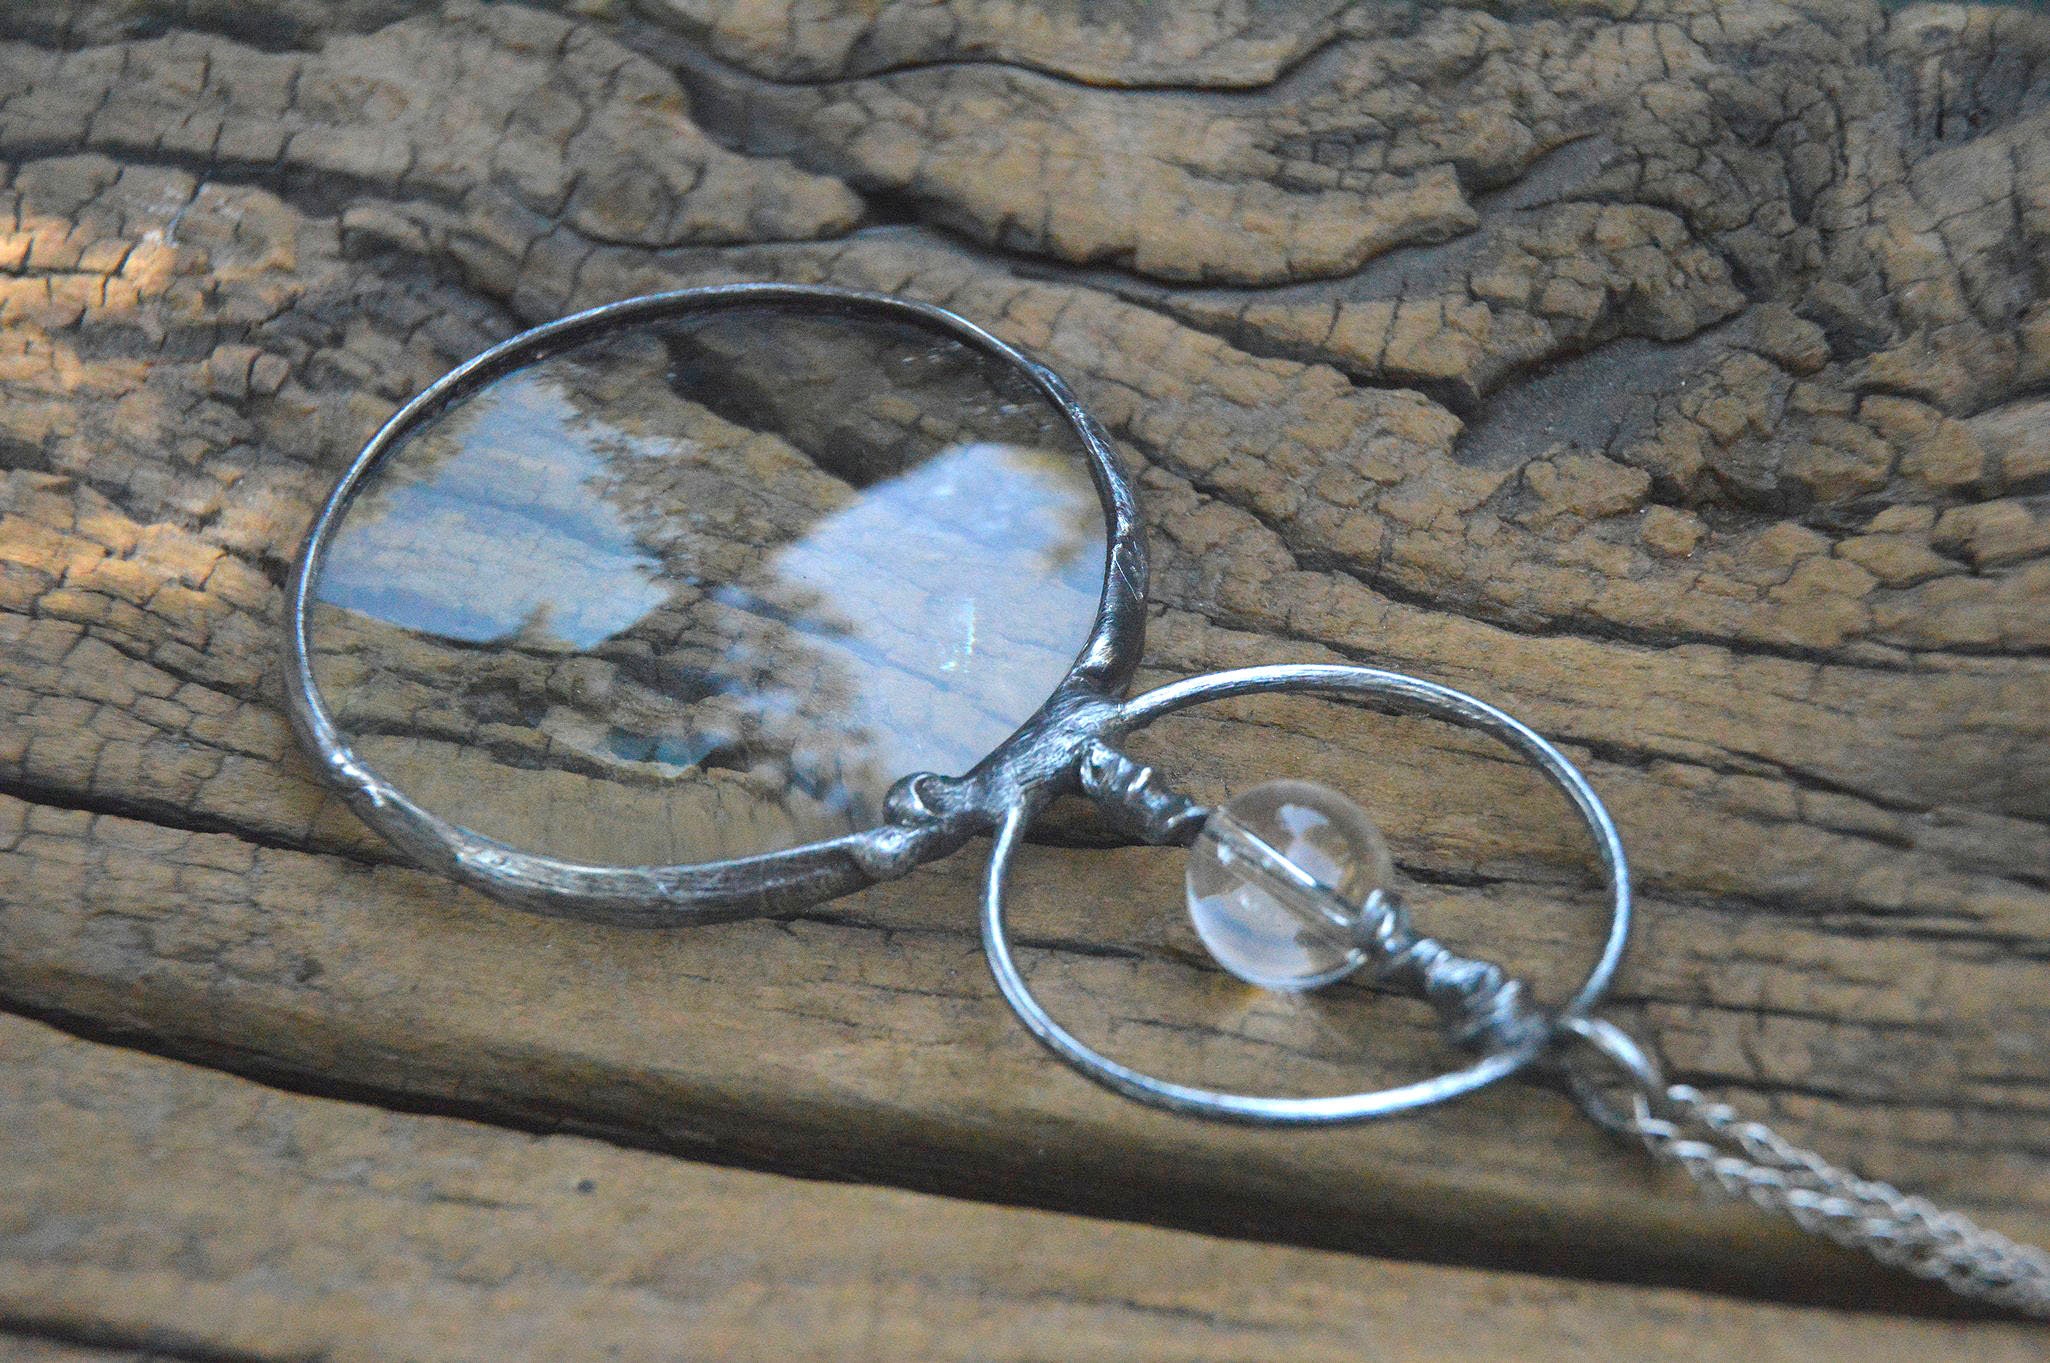 Magnifying Glass, 10X Magnification, 2 Diameter Glass, Hand Turned White  Oak Handle, Chrome Trim, Engraved, Personalized, Gift for Dad 